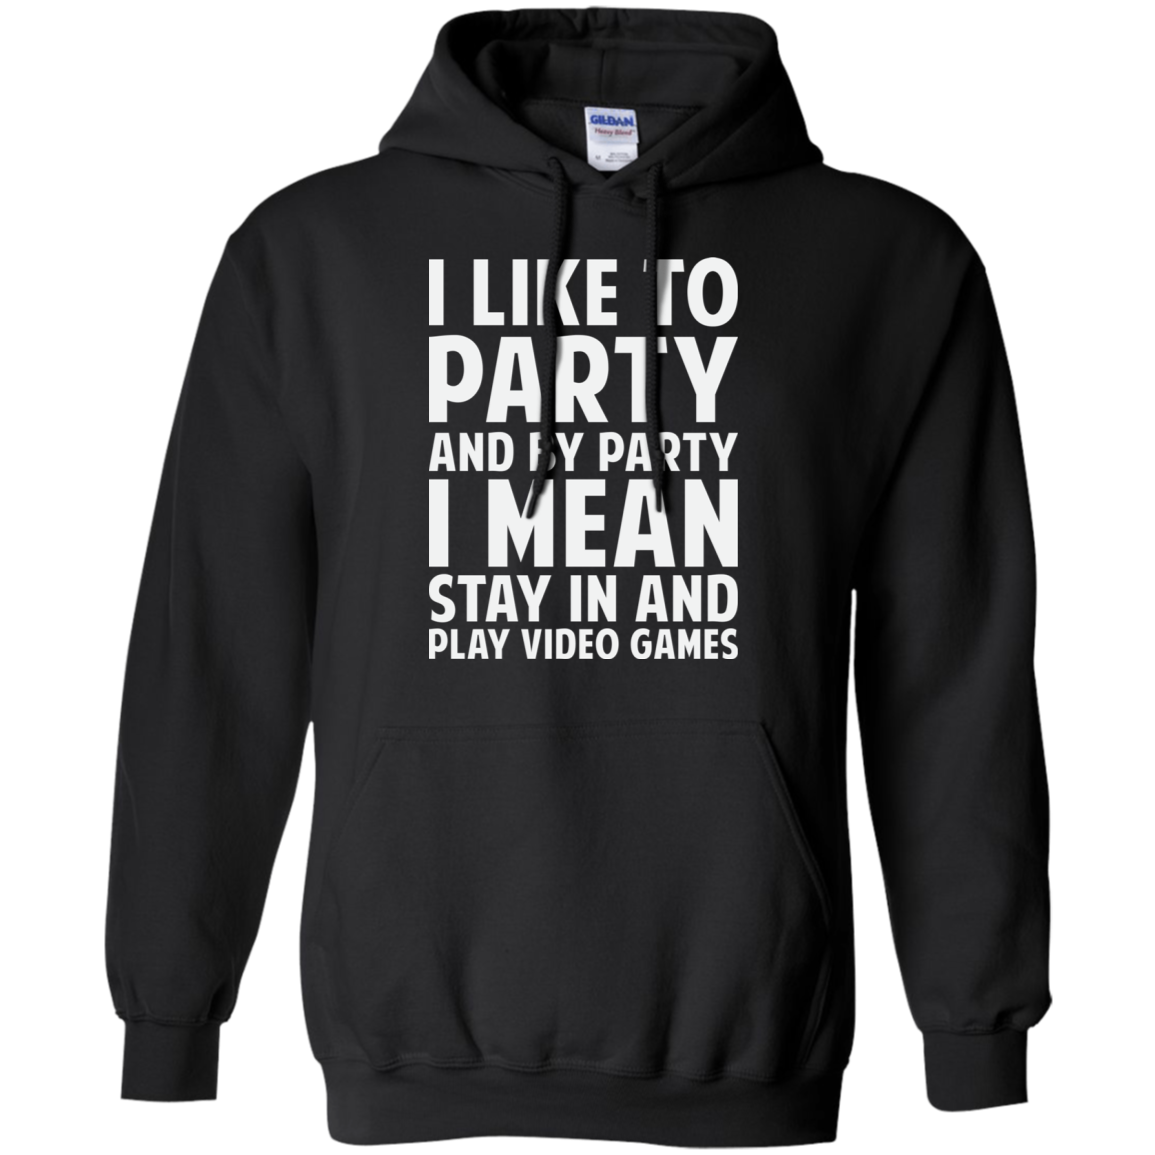 I Like To Party And By Party I Mean Stay In And Play Video Games Pullover Hoodie 8 oz.